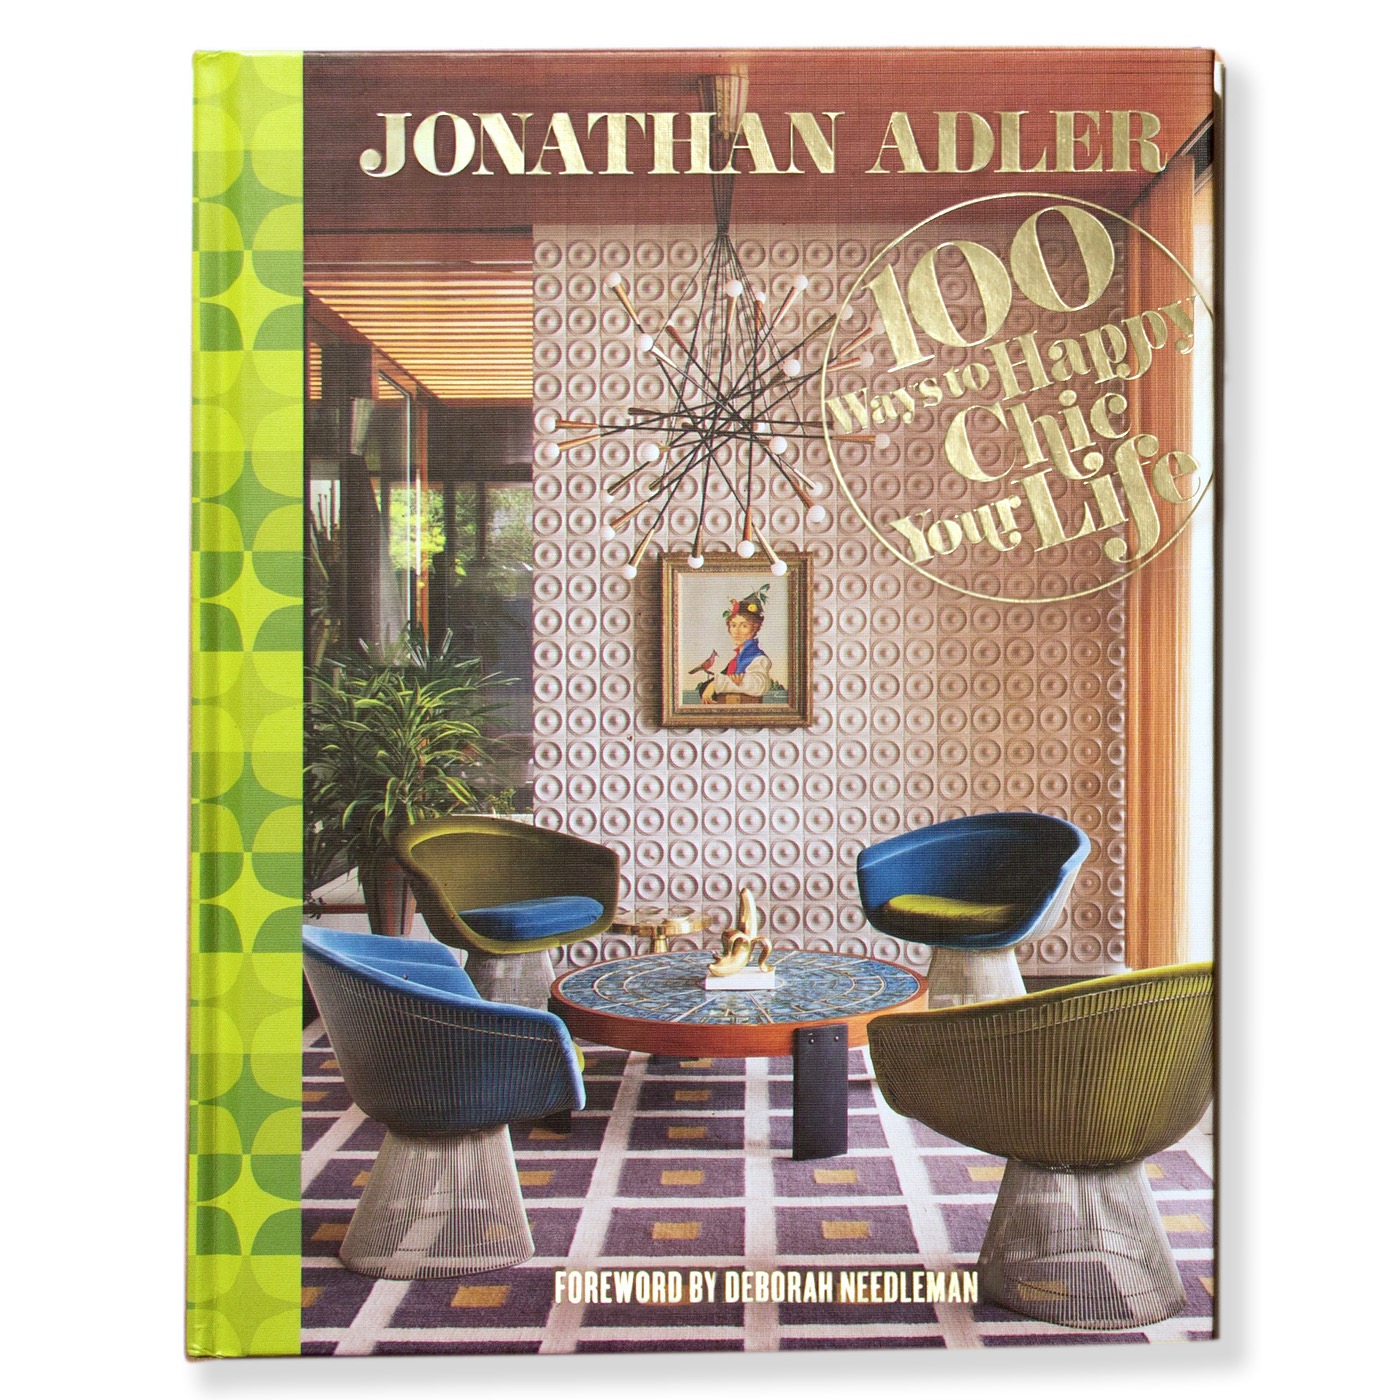 100 Ways to Happy Chic Your Life by Jonathan Adler. The King of cool helps style your life | More Design Books on the RSD Blog. www.rsdesigns.com.au/blog/